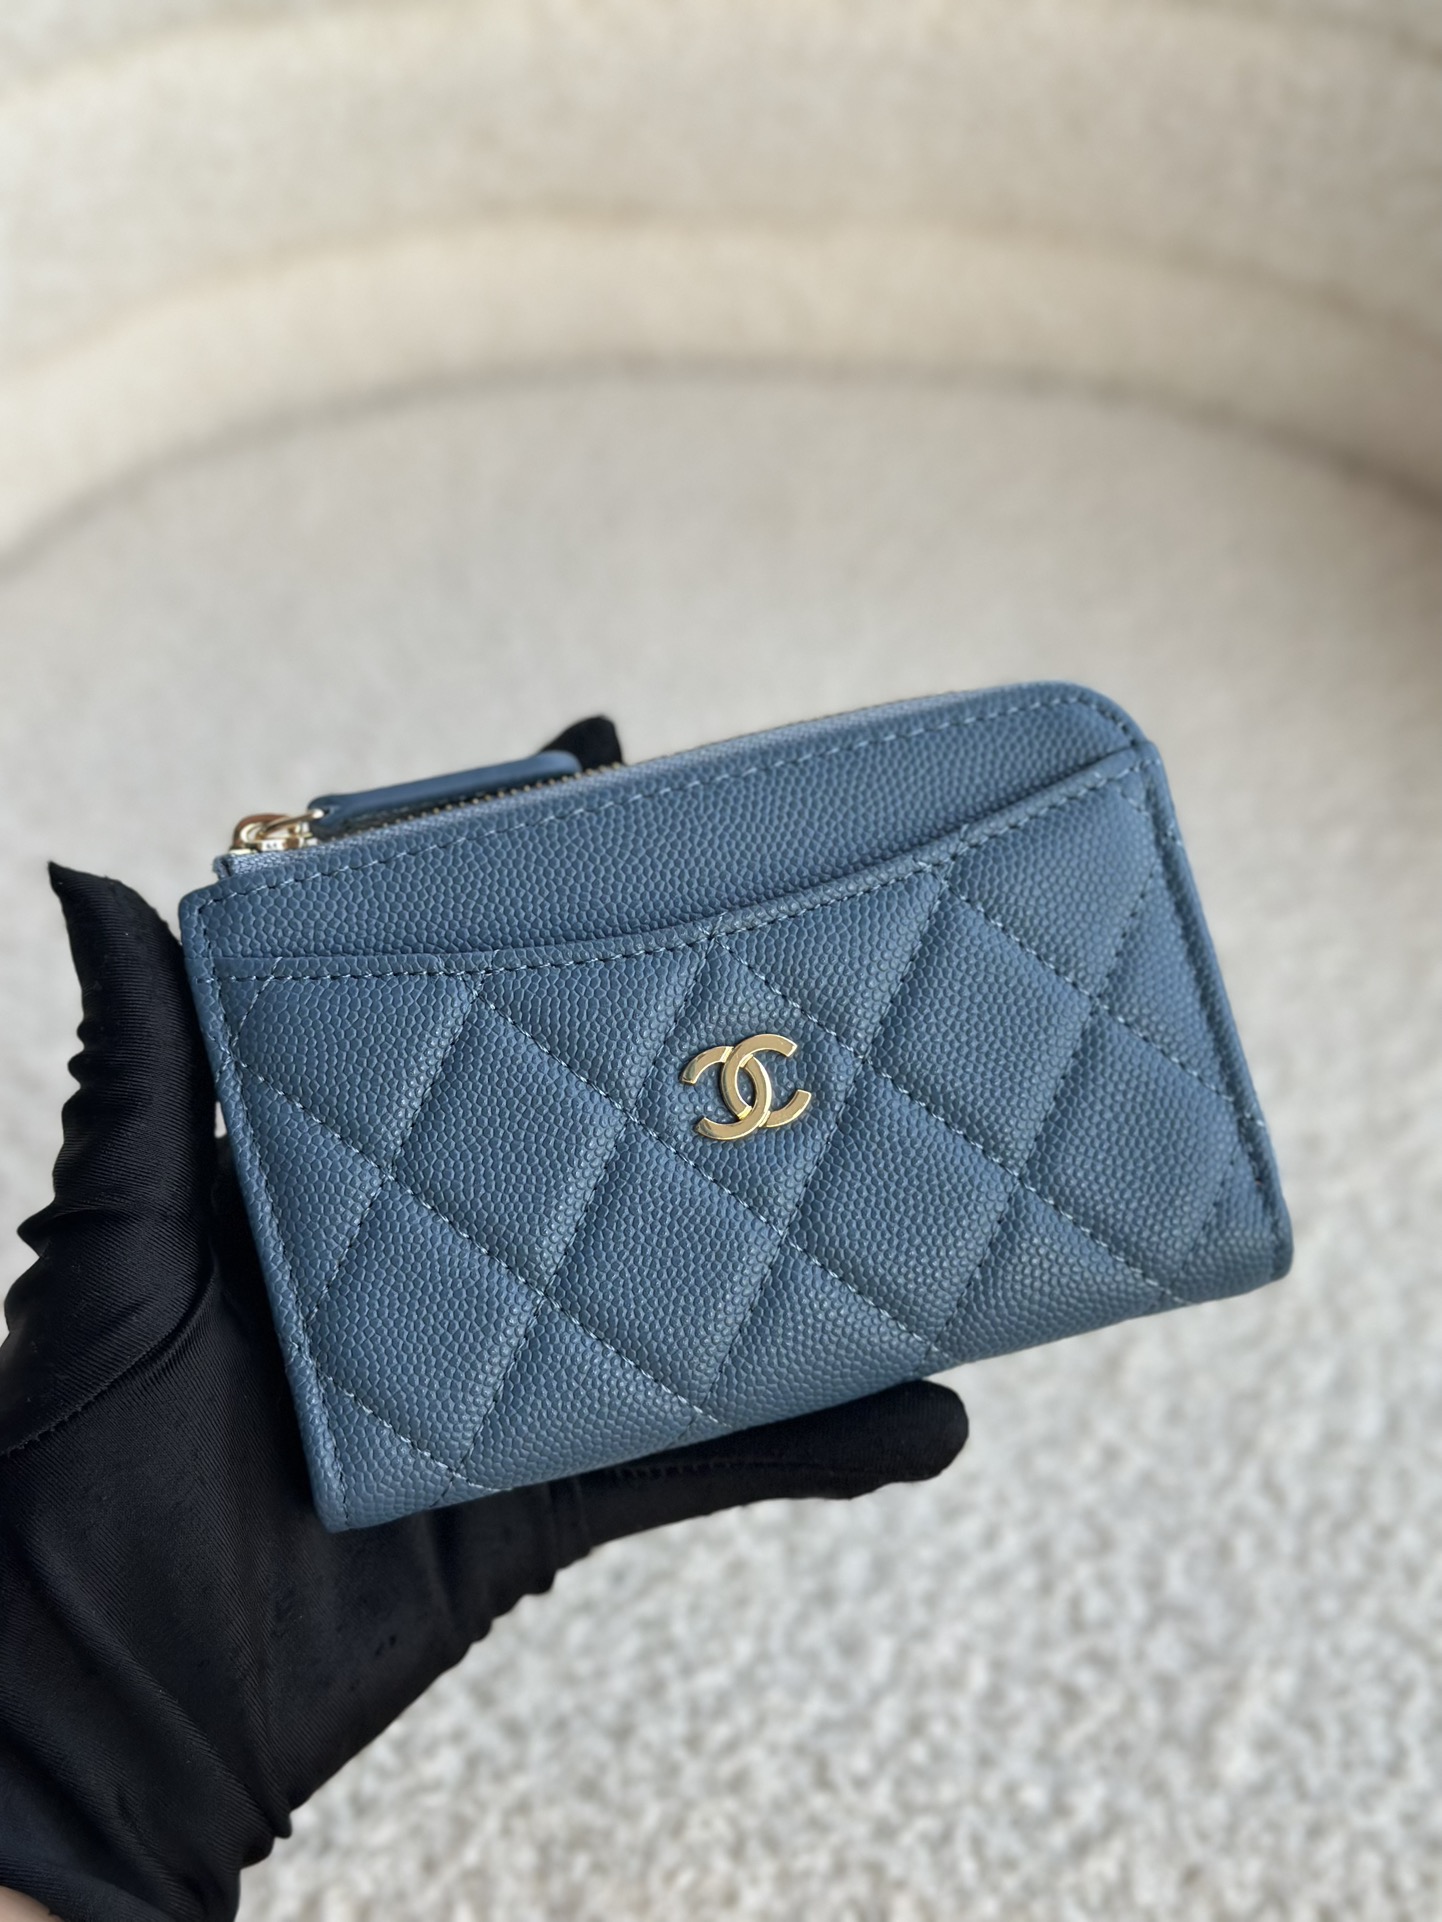 Chanel Classic Flap Bag Wallet Blue Gold Hardware